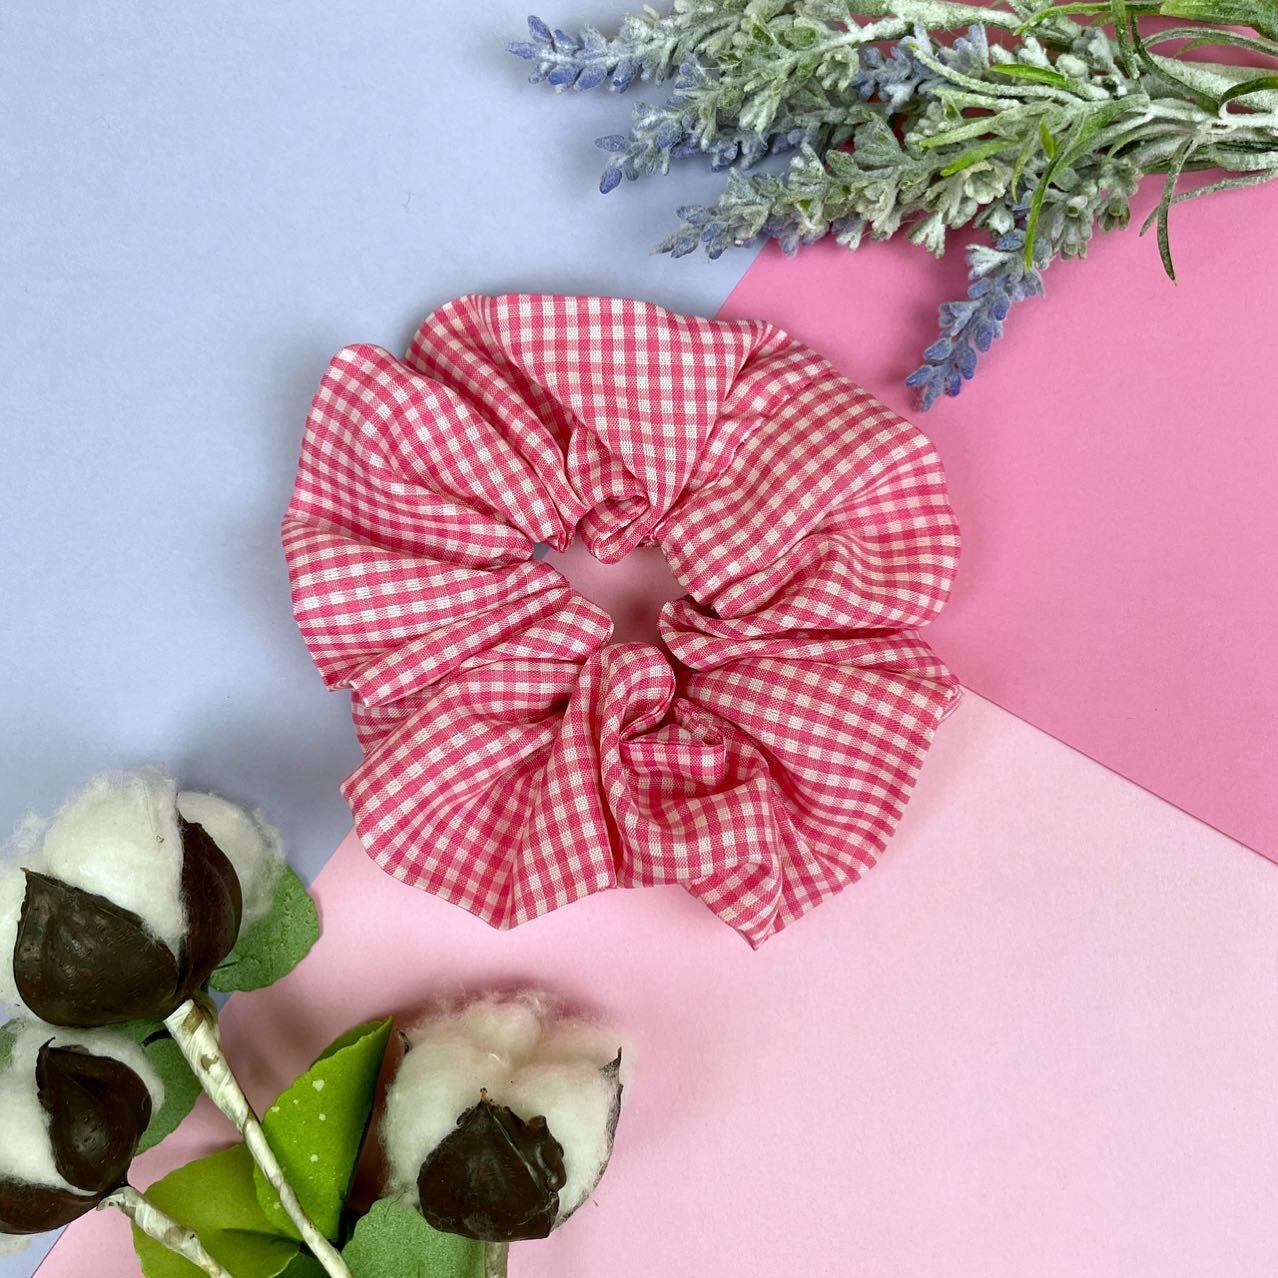 Hot pink gingham scrap fabric scrunchie for maximum picnic vibes 💖💖💖
.
.
.
#sustainablesmallbusiness #ethicalsmallbusiness #scrunchie #handmadescrunchies #kawaiiaccessories #handmadeaccessories #kawaiismallbusiness #ethicalclothing #ethicalaccesso